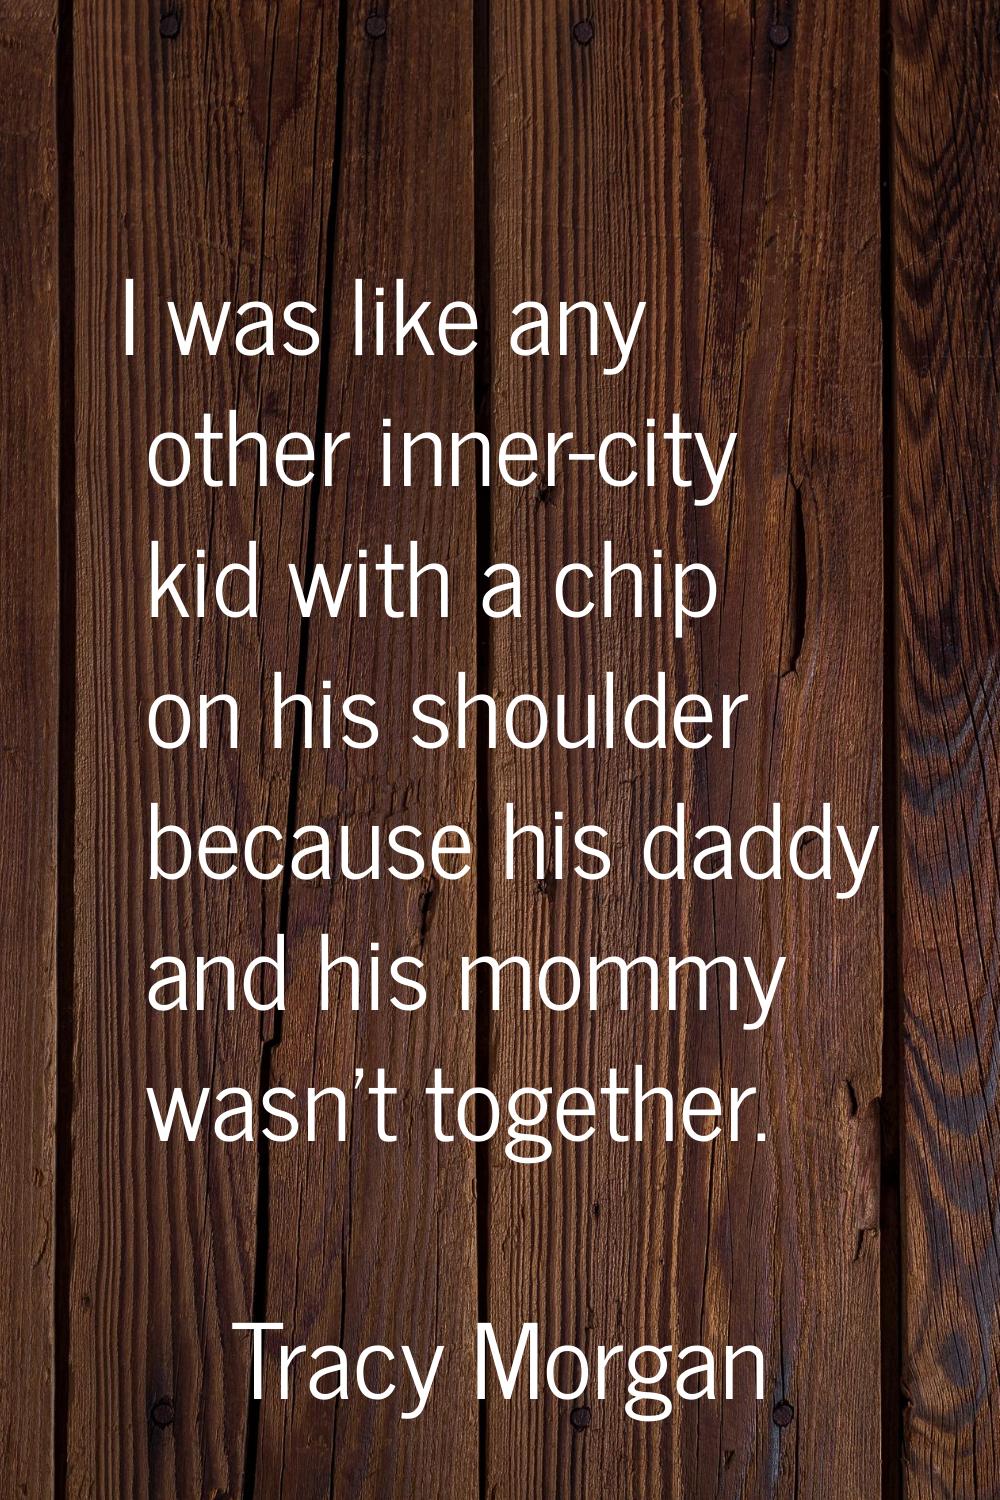 I was like any other inner-city kid with a chip on his shoulder because his daddy and his mommy was